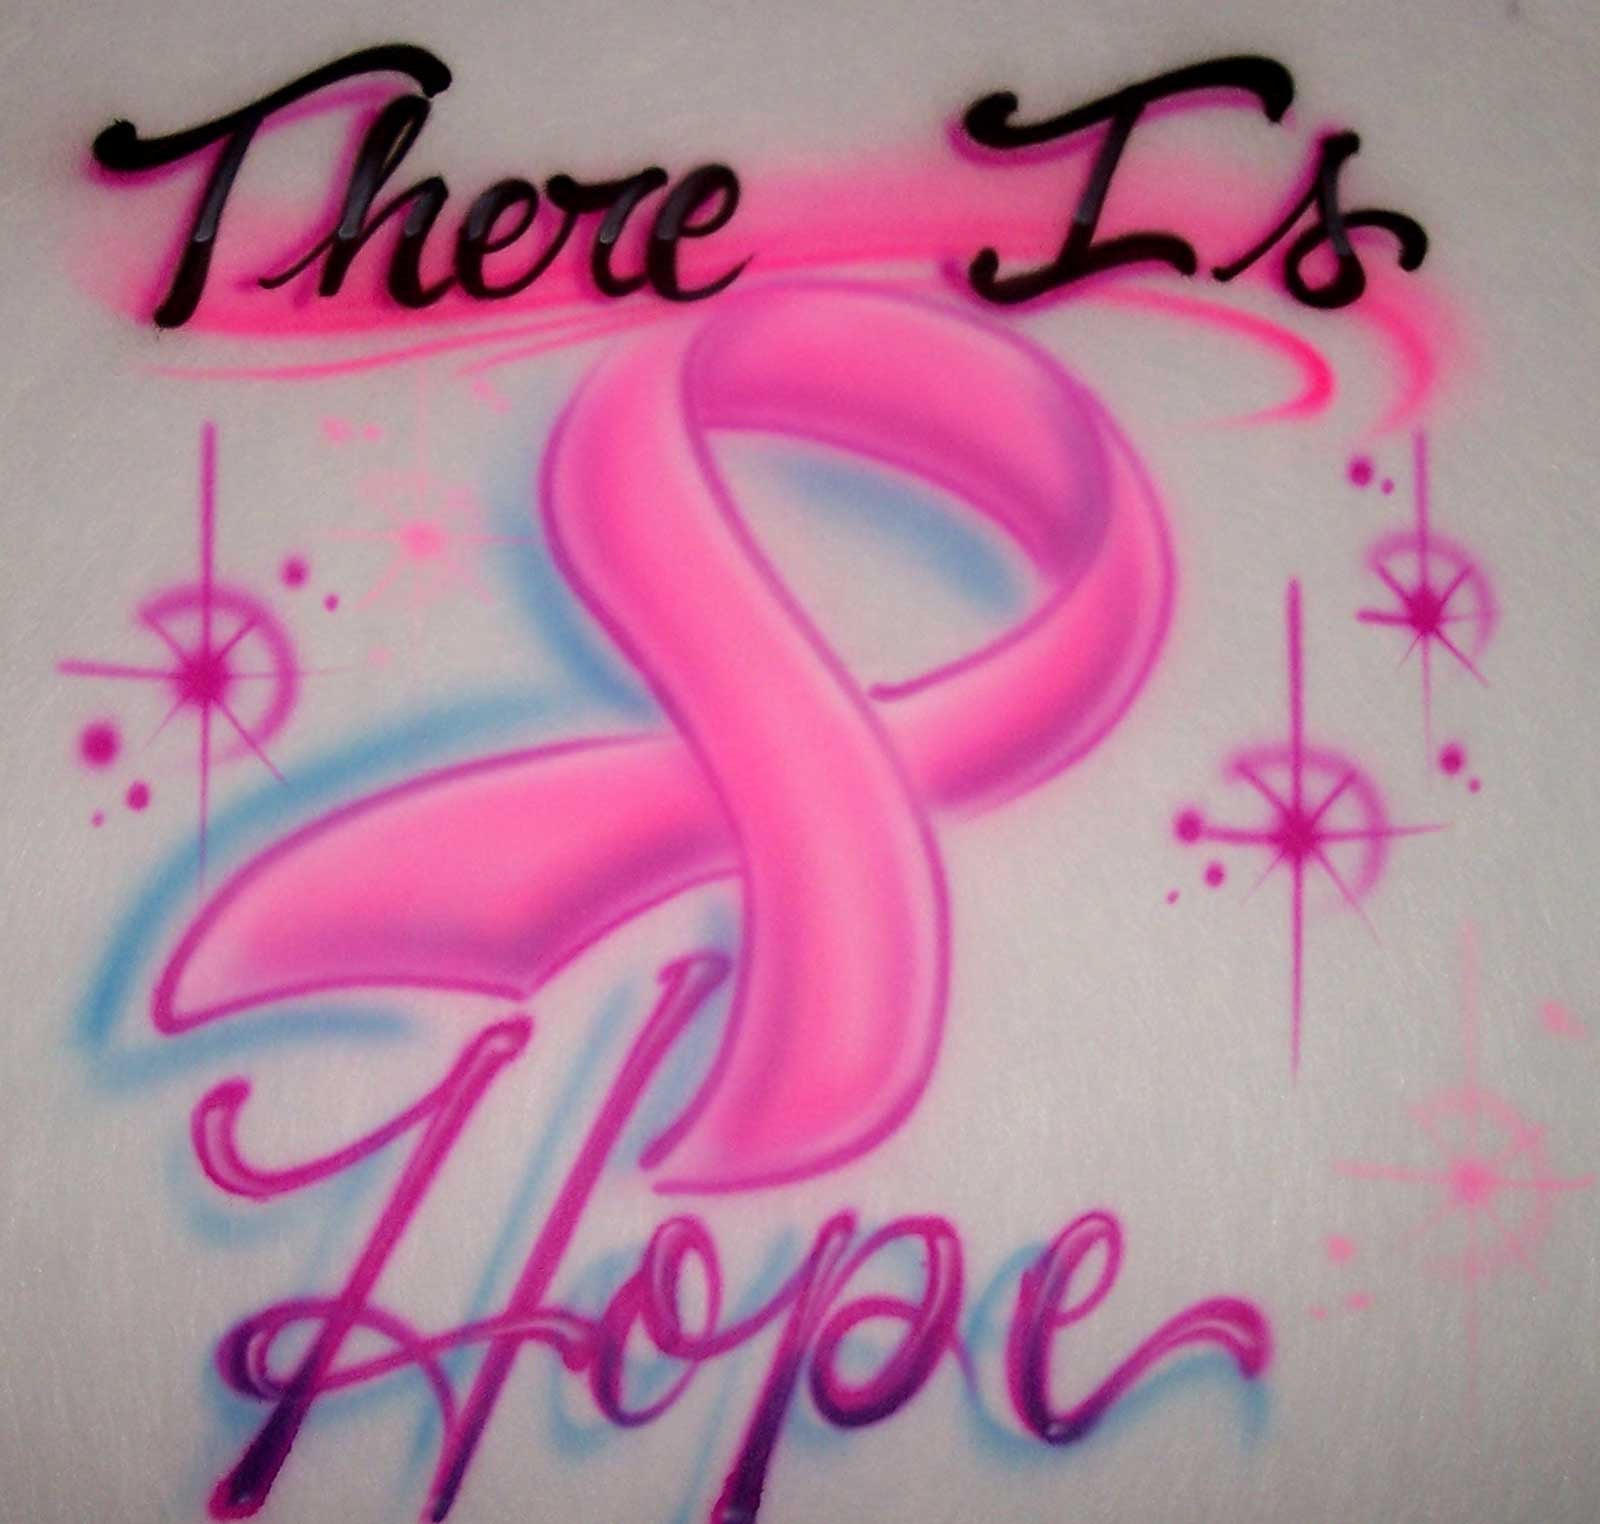 There is hope breast cancer awareness airbrushed shirt